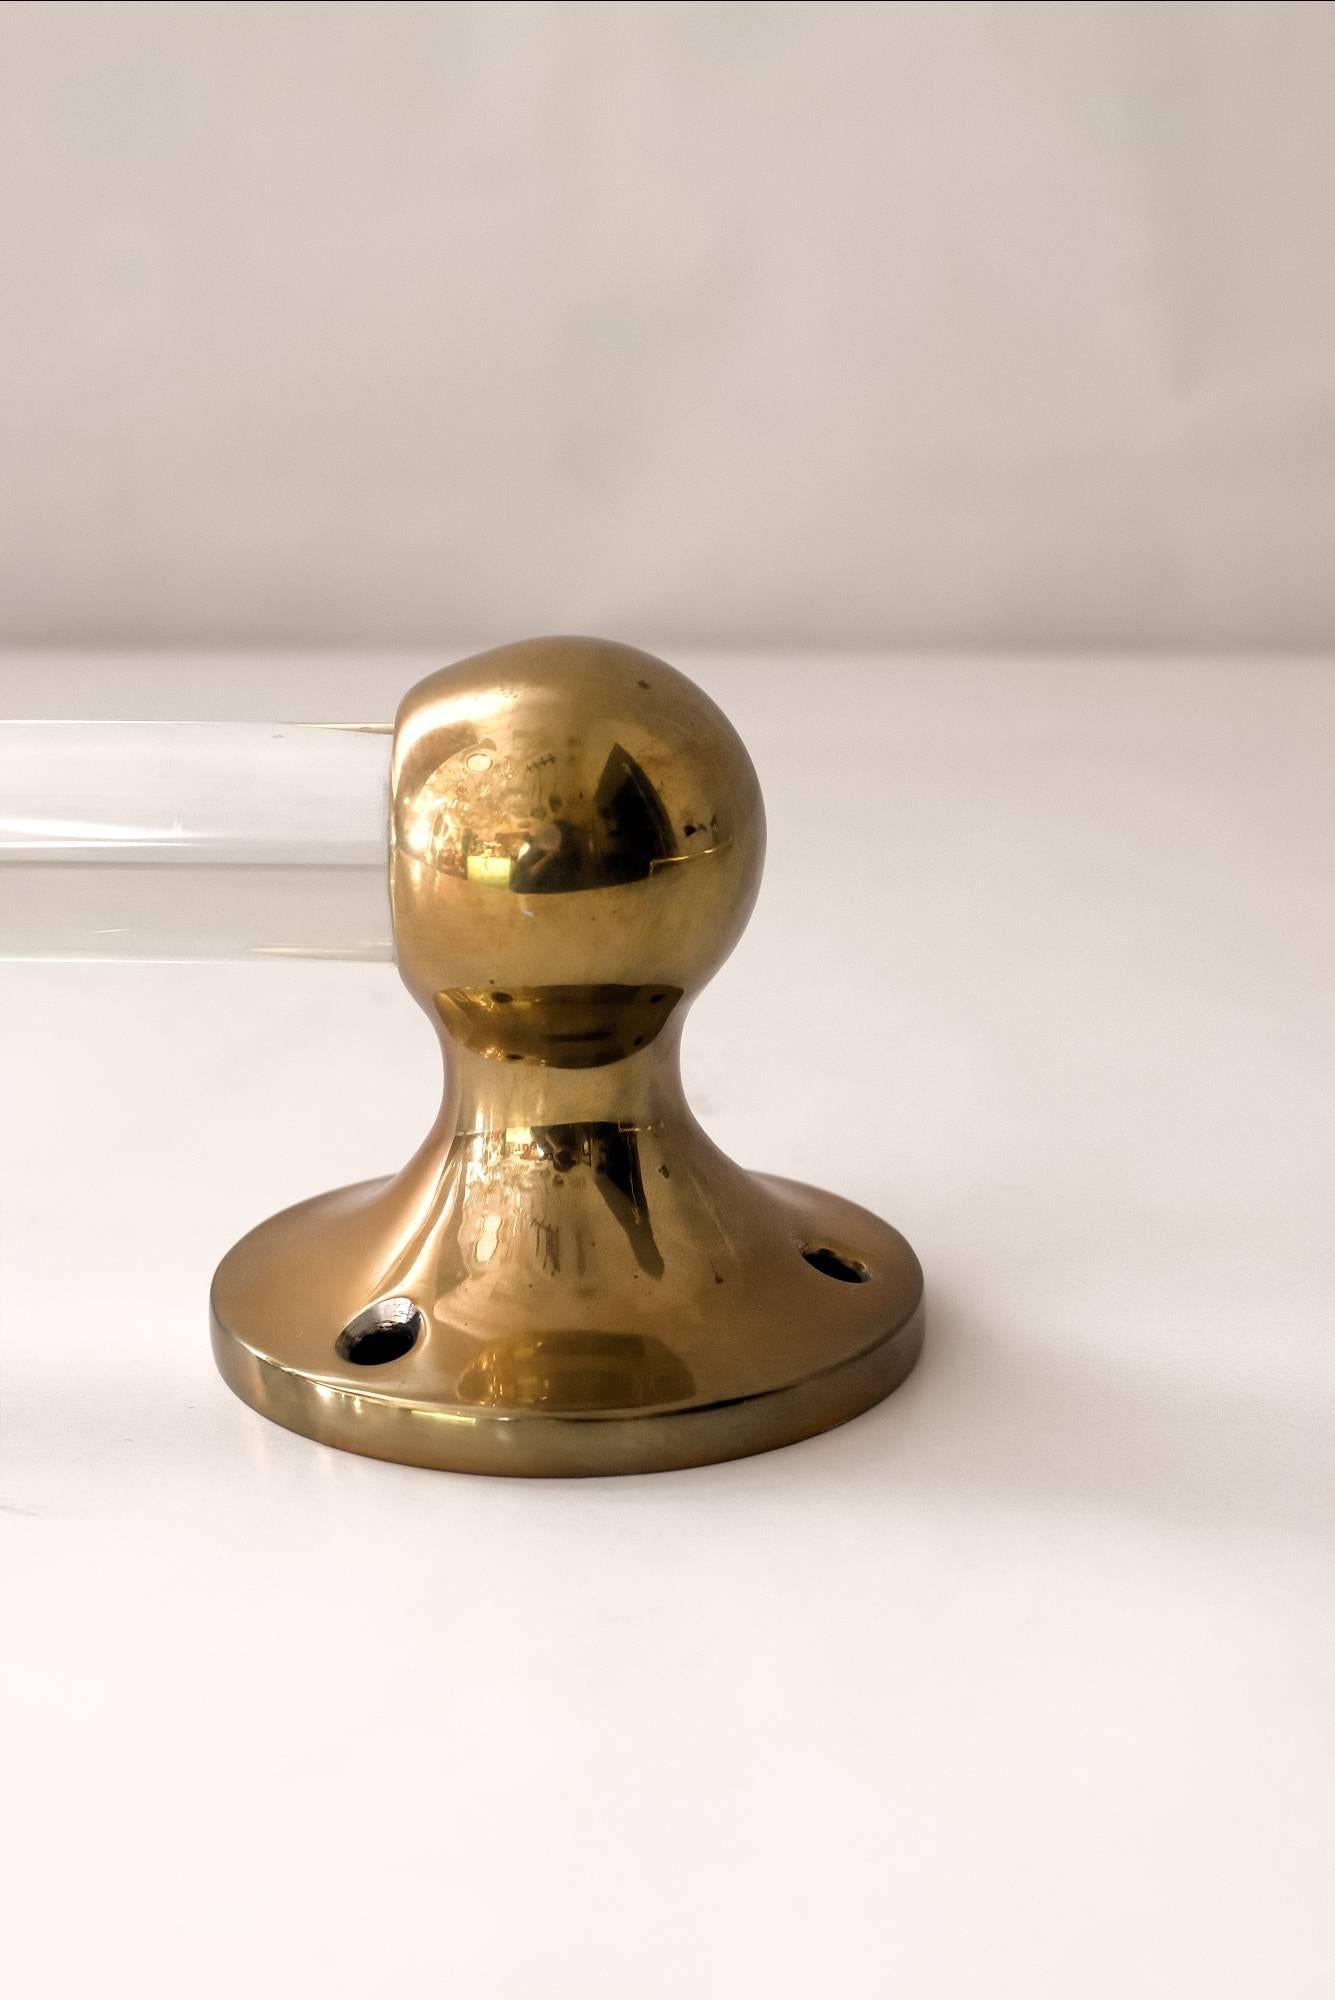 Two towel holder brass and glass
Two are available, priced and sold per piece.

   